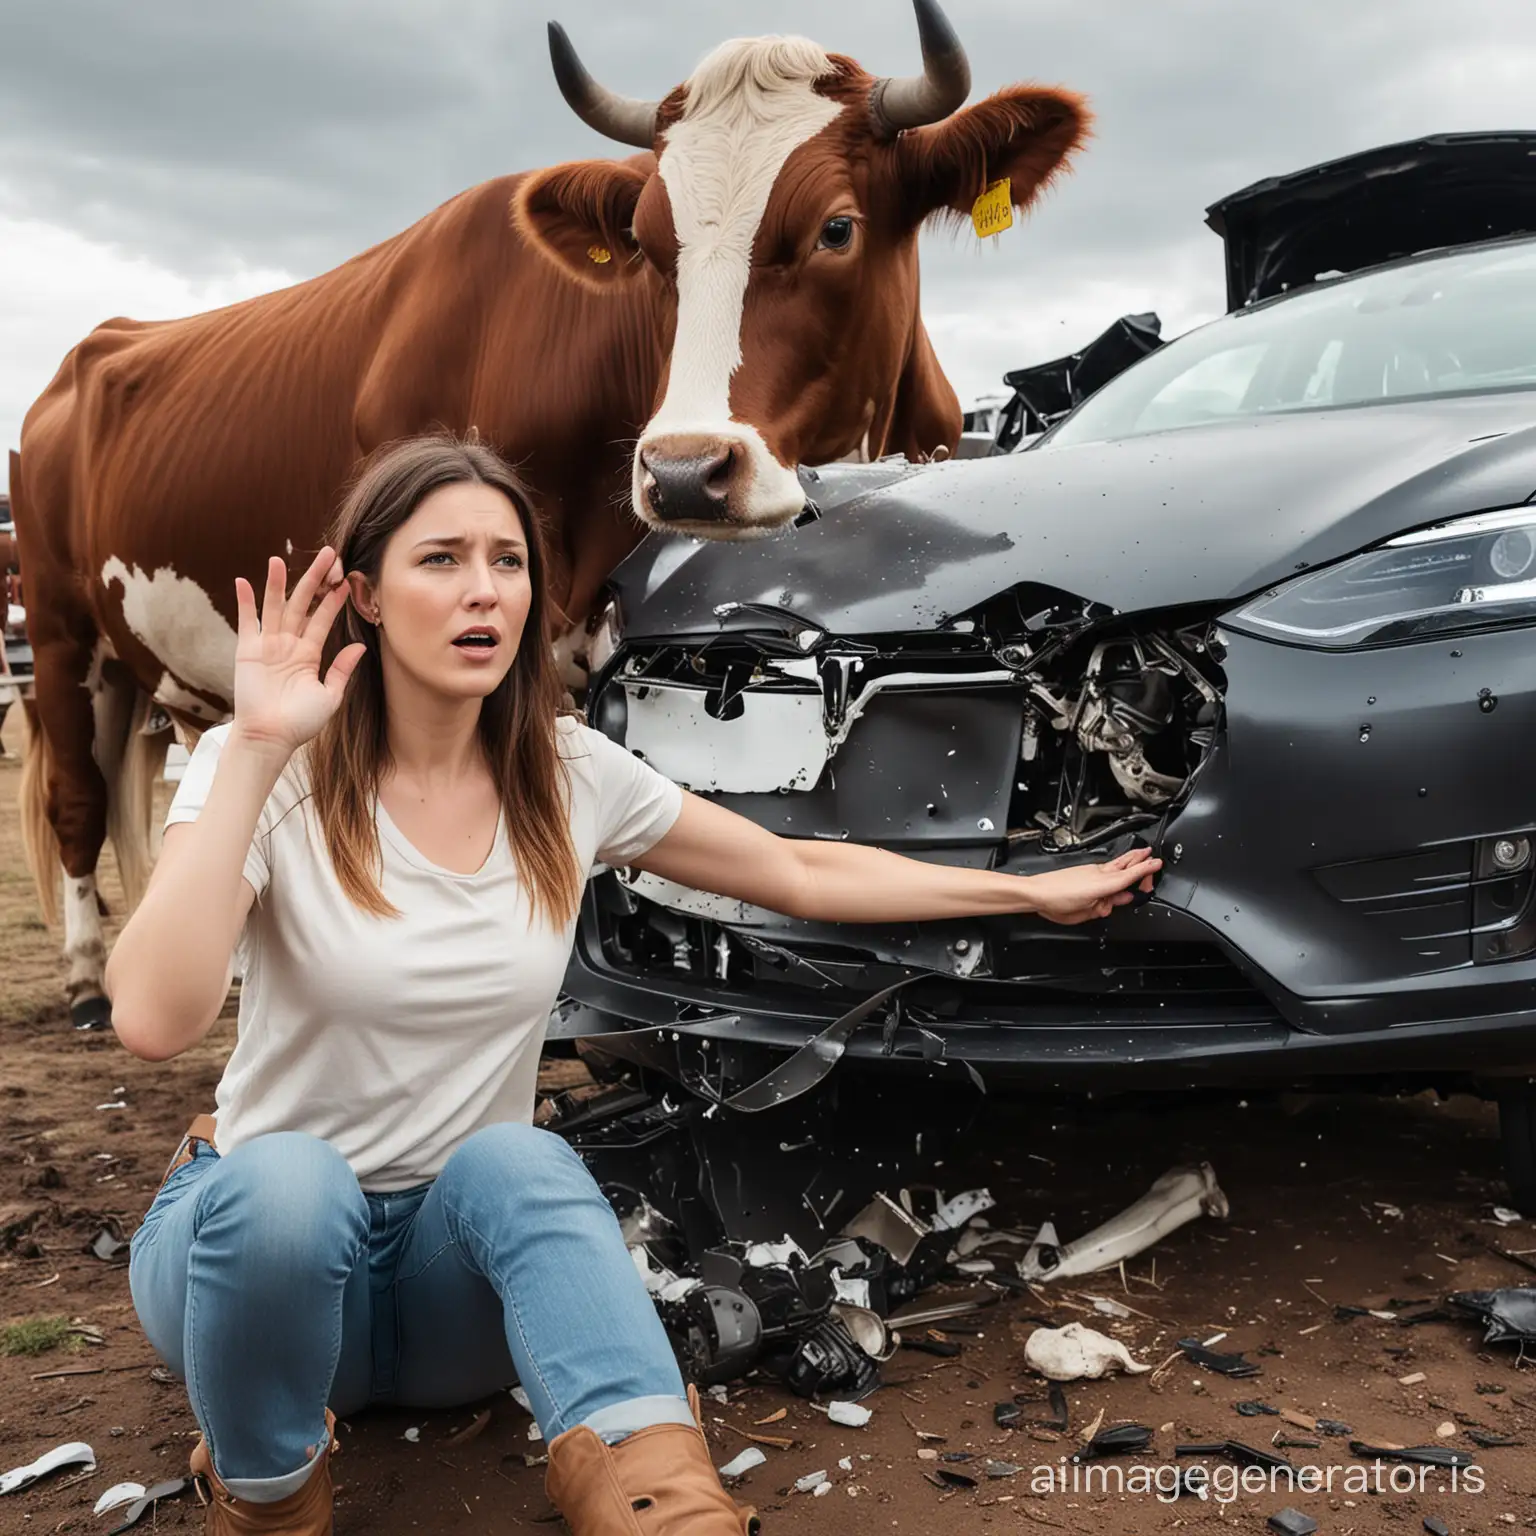 Tesla-Car-Crash-Woman-in-Embarrassment-Amidst-Flying-Cow-and-Car-Parts